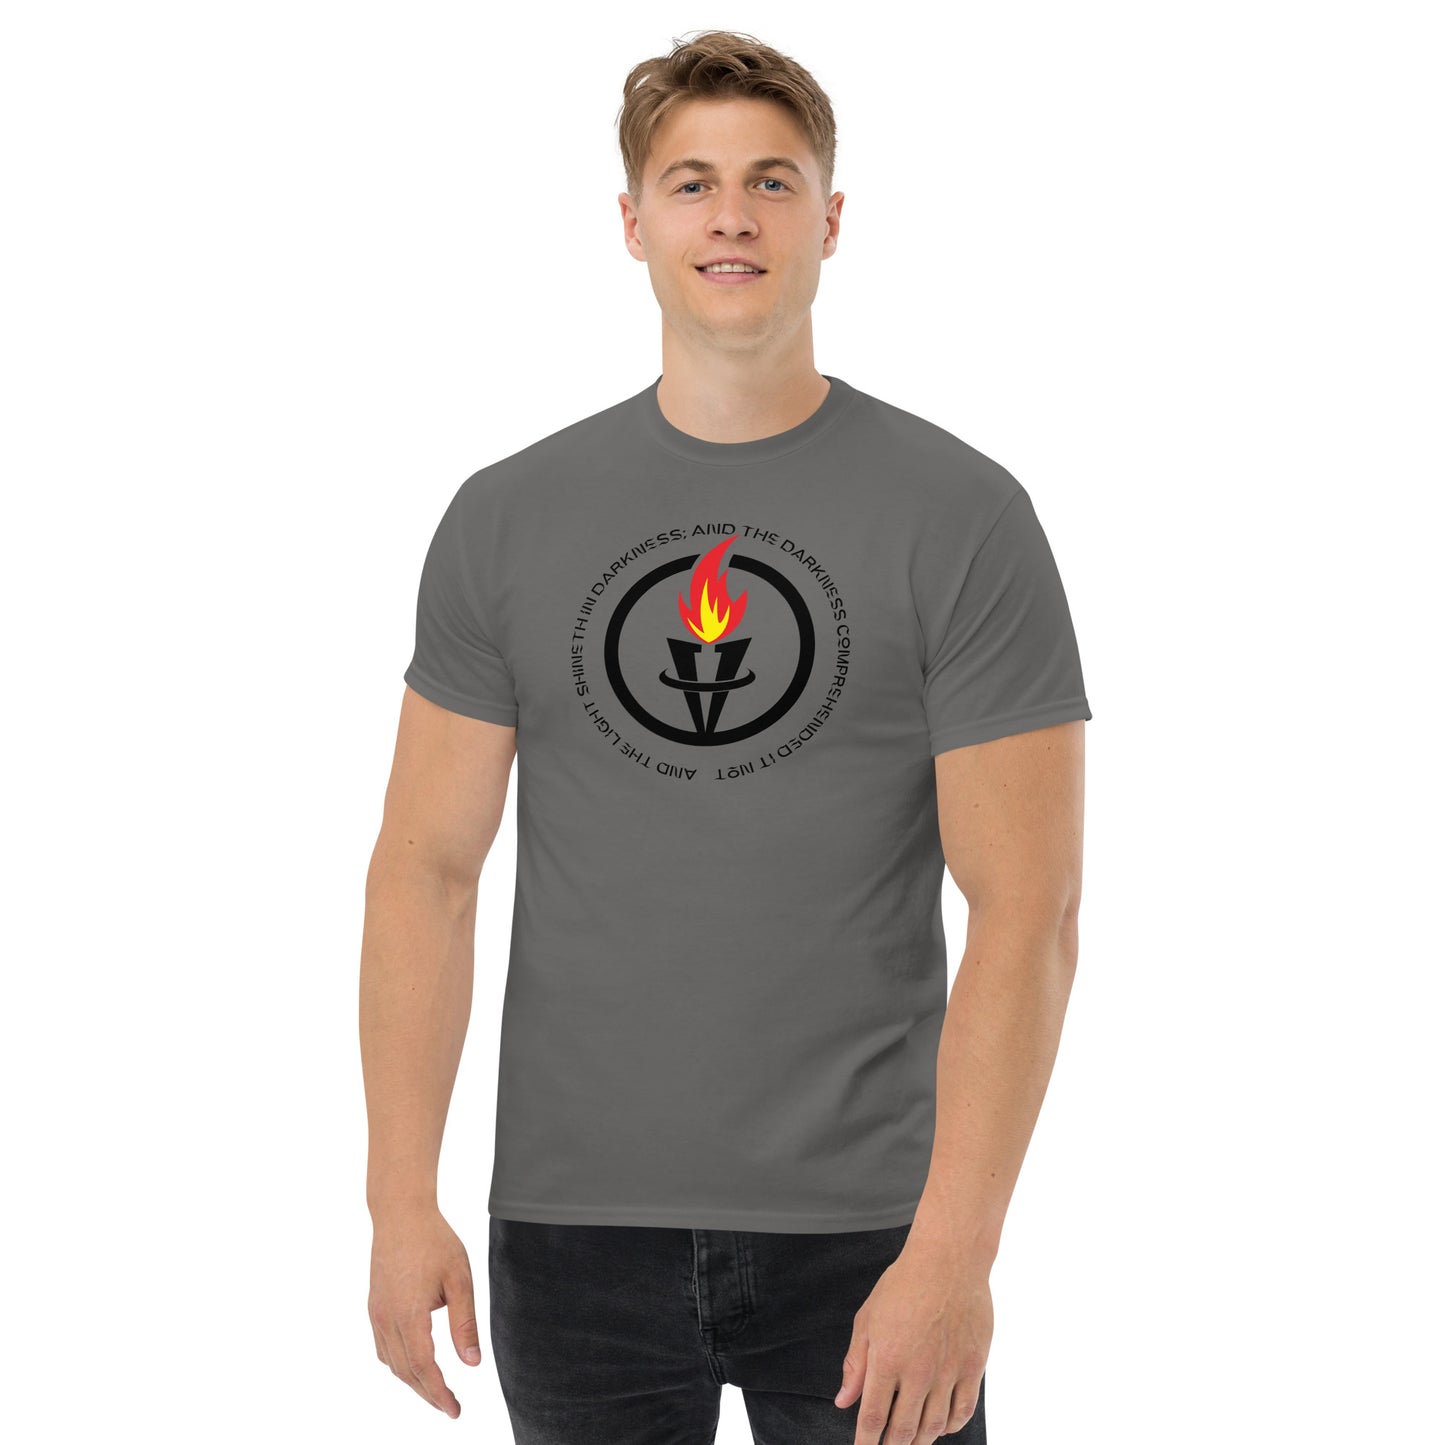 And the light shineth in darkness; and the darkness comprehended it not John 1:5 Men's classic tee